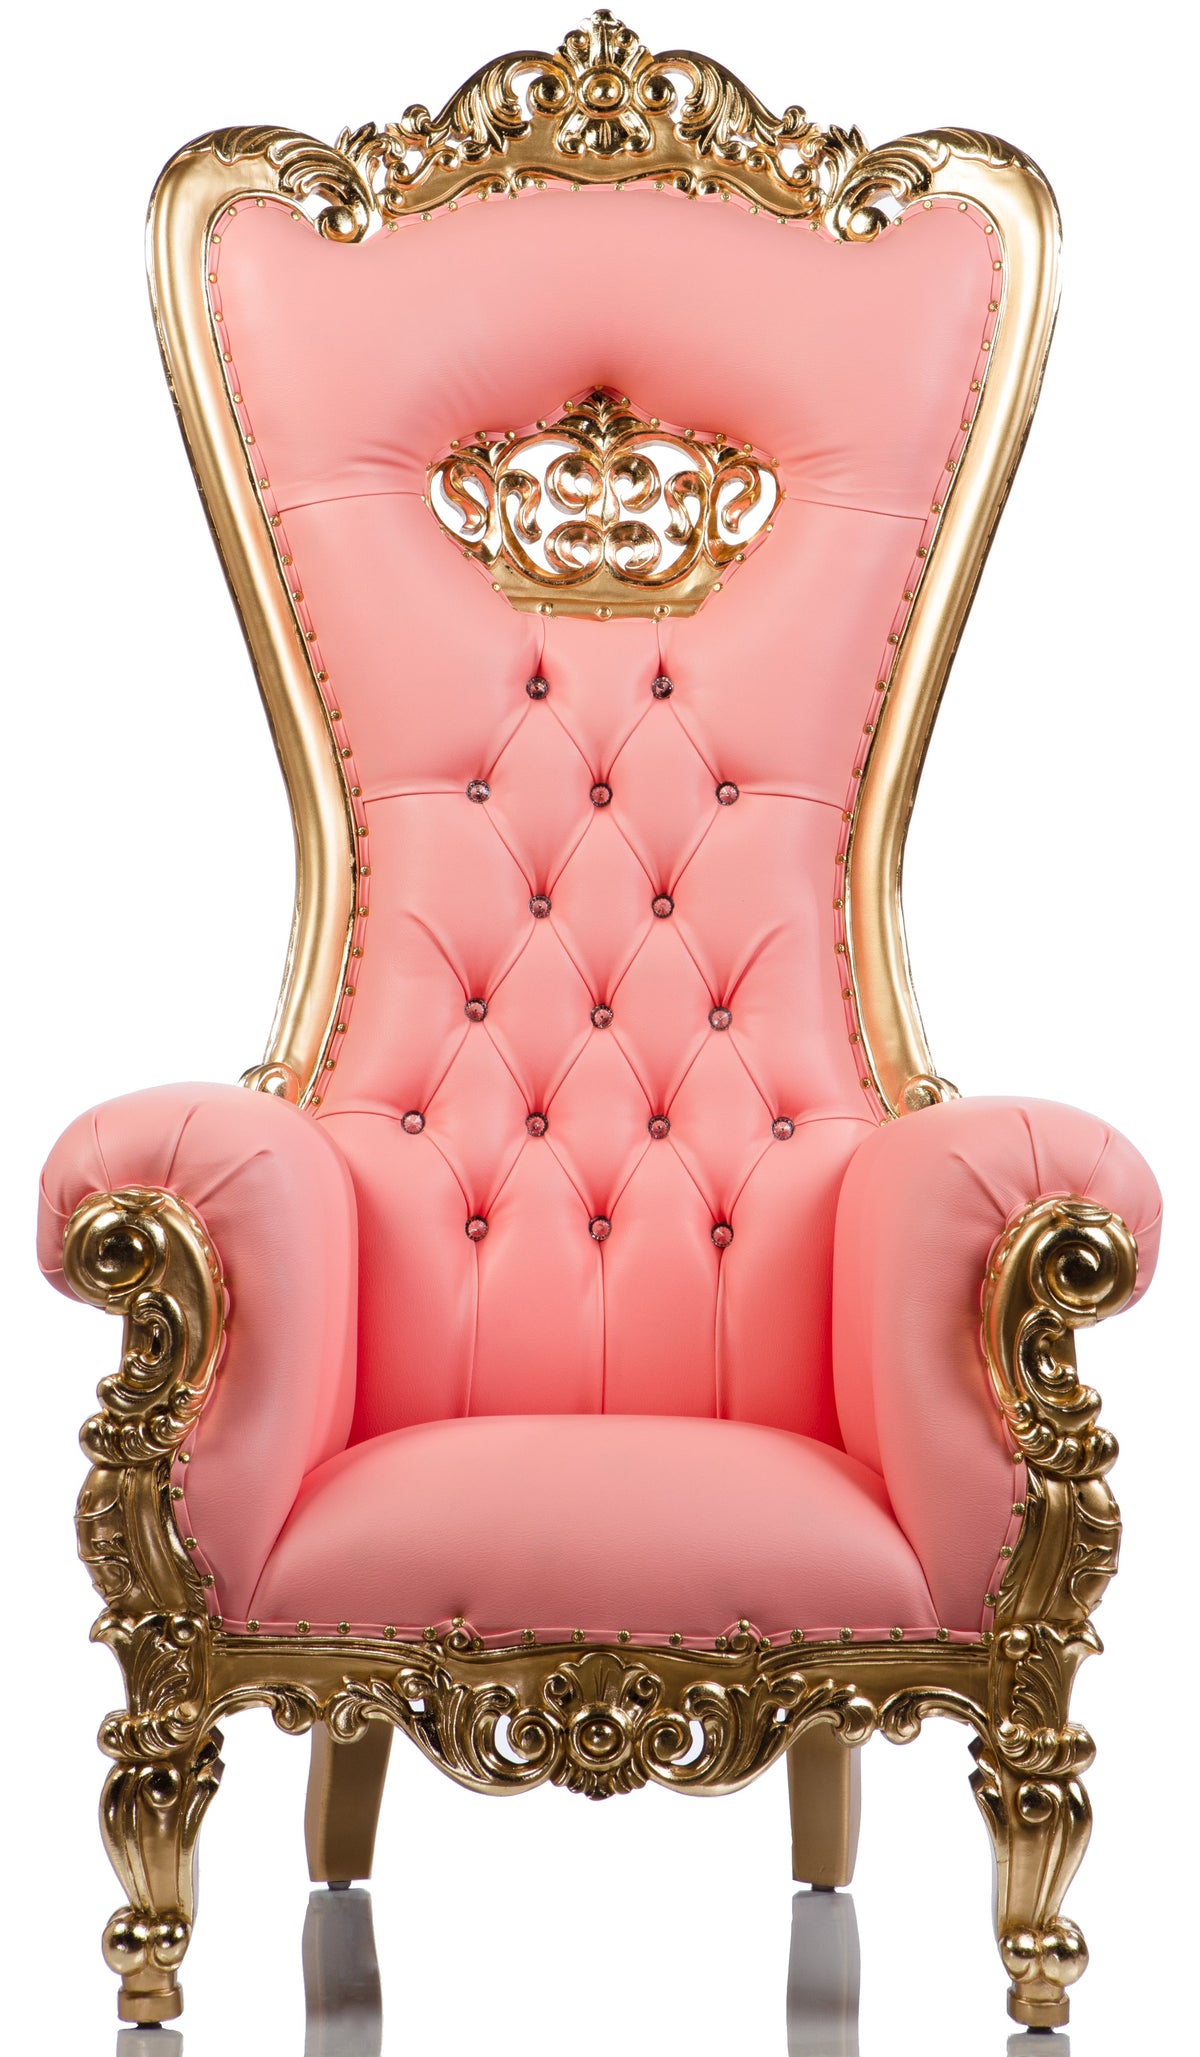 Vintage "Crowned Bubble Gum" Shellback Throne (Pink/Gold)